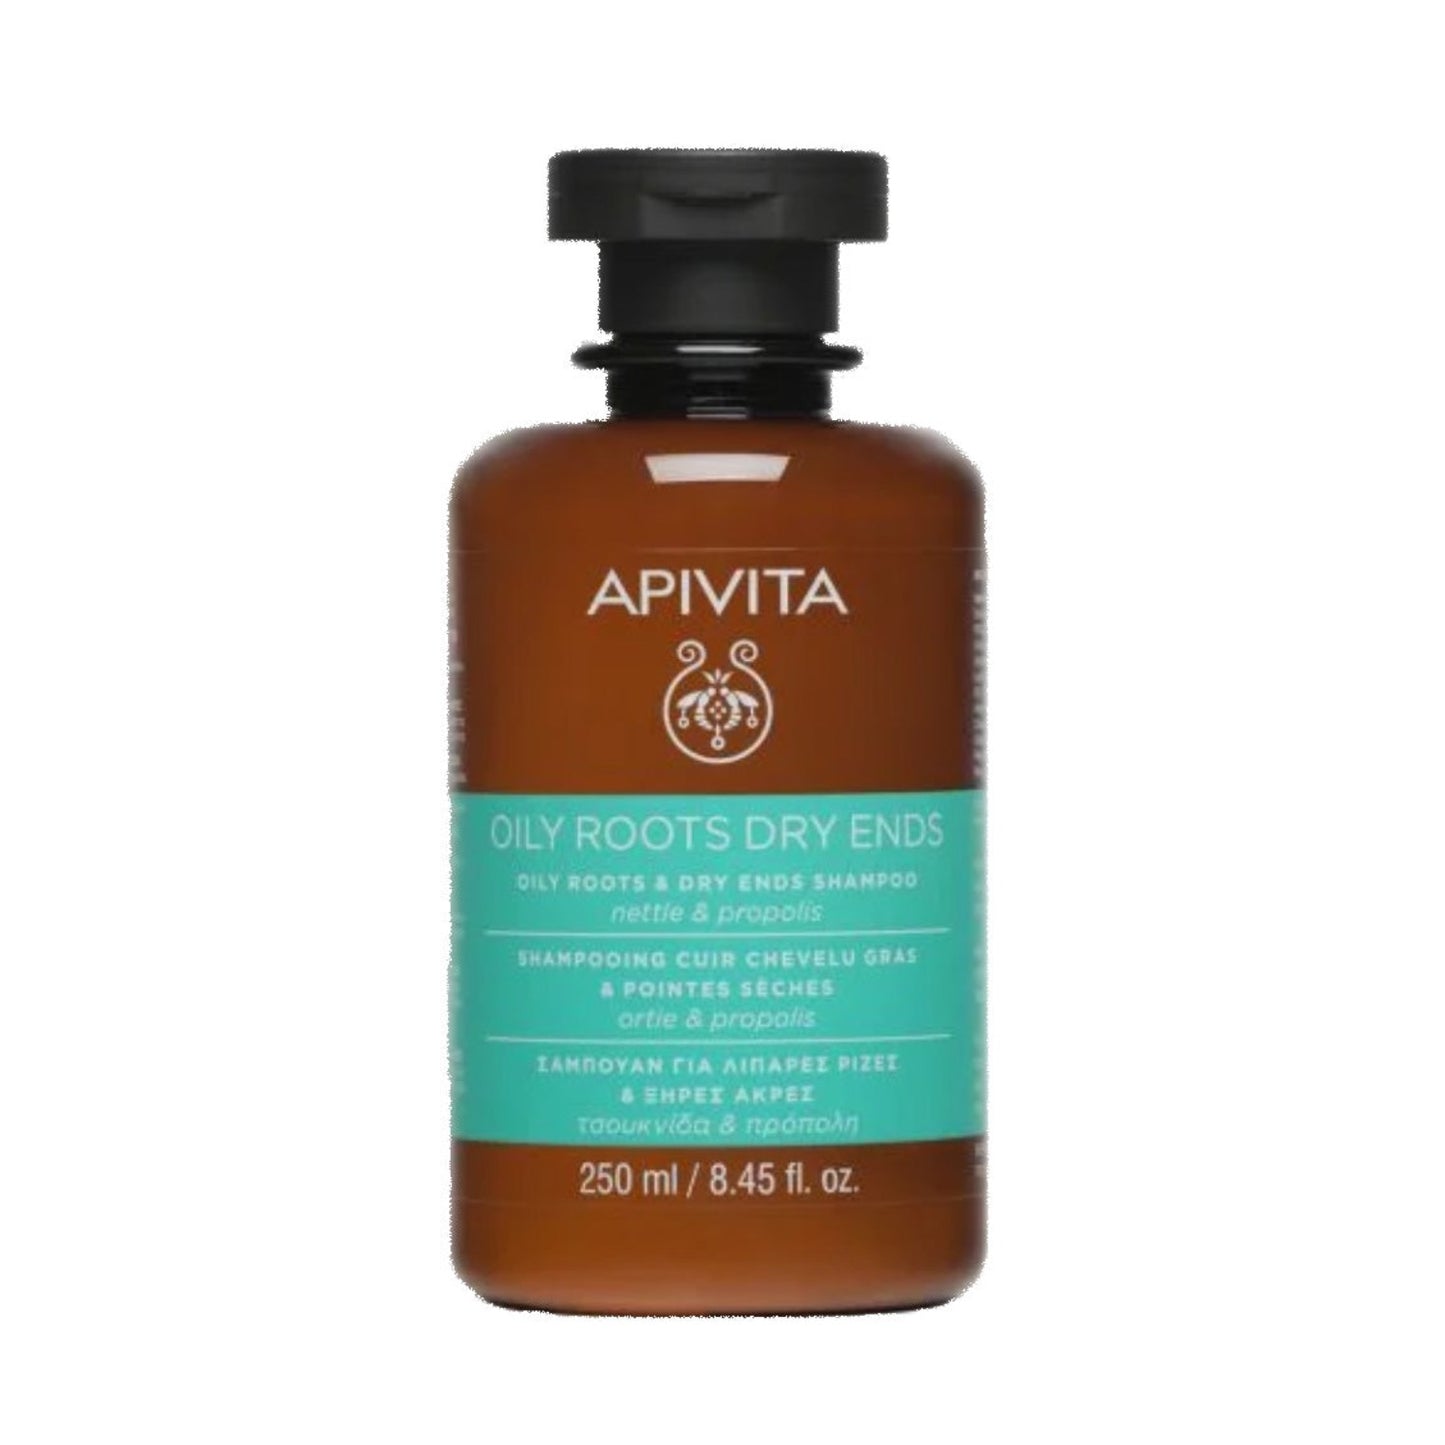 Apivita Oily Roots & Dry Ends Shampoo is a proprietary blend of Greek organic nettle, propolis, sage, and grapefruit essential oils regulate oiliness.